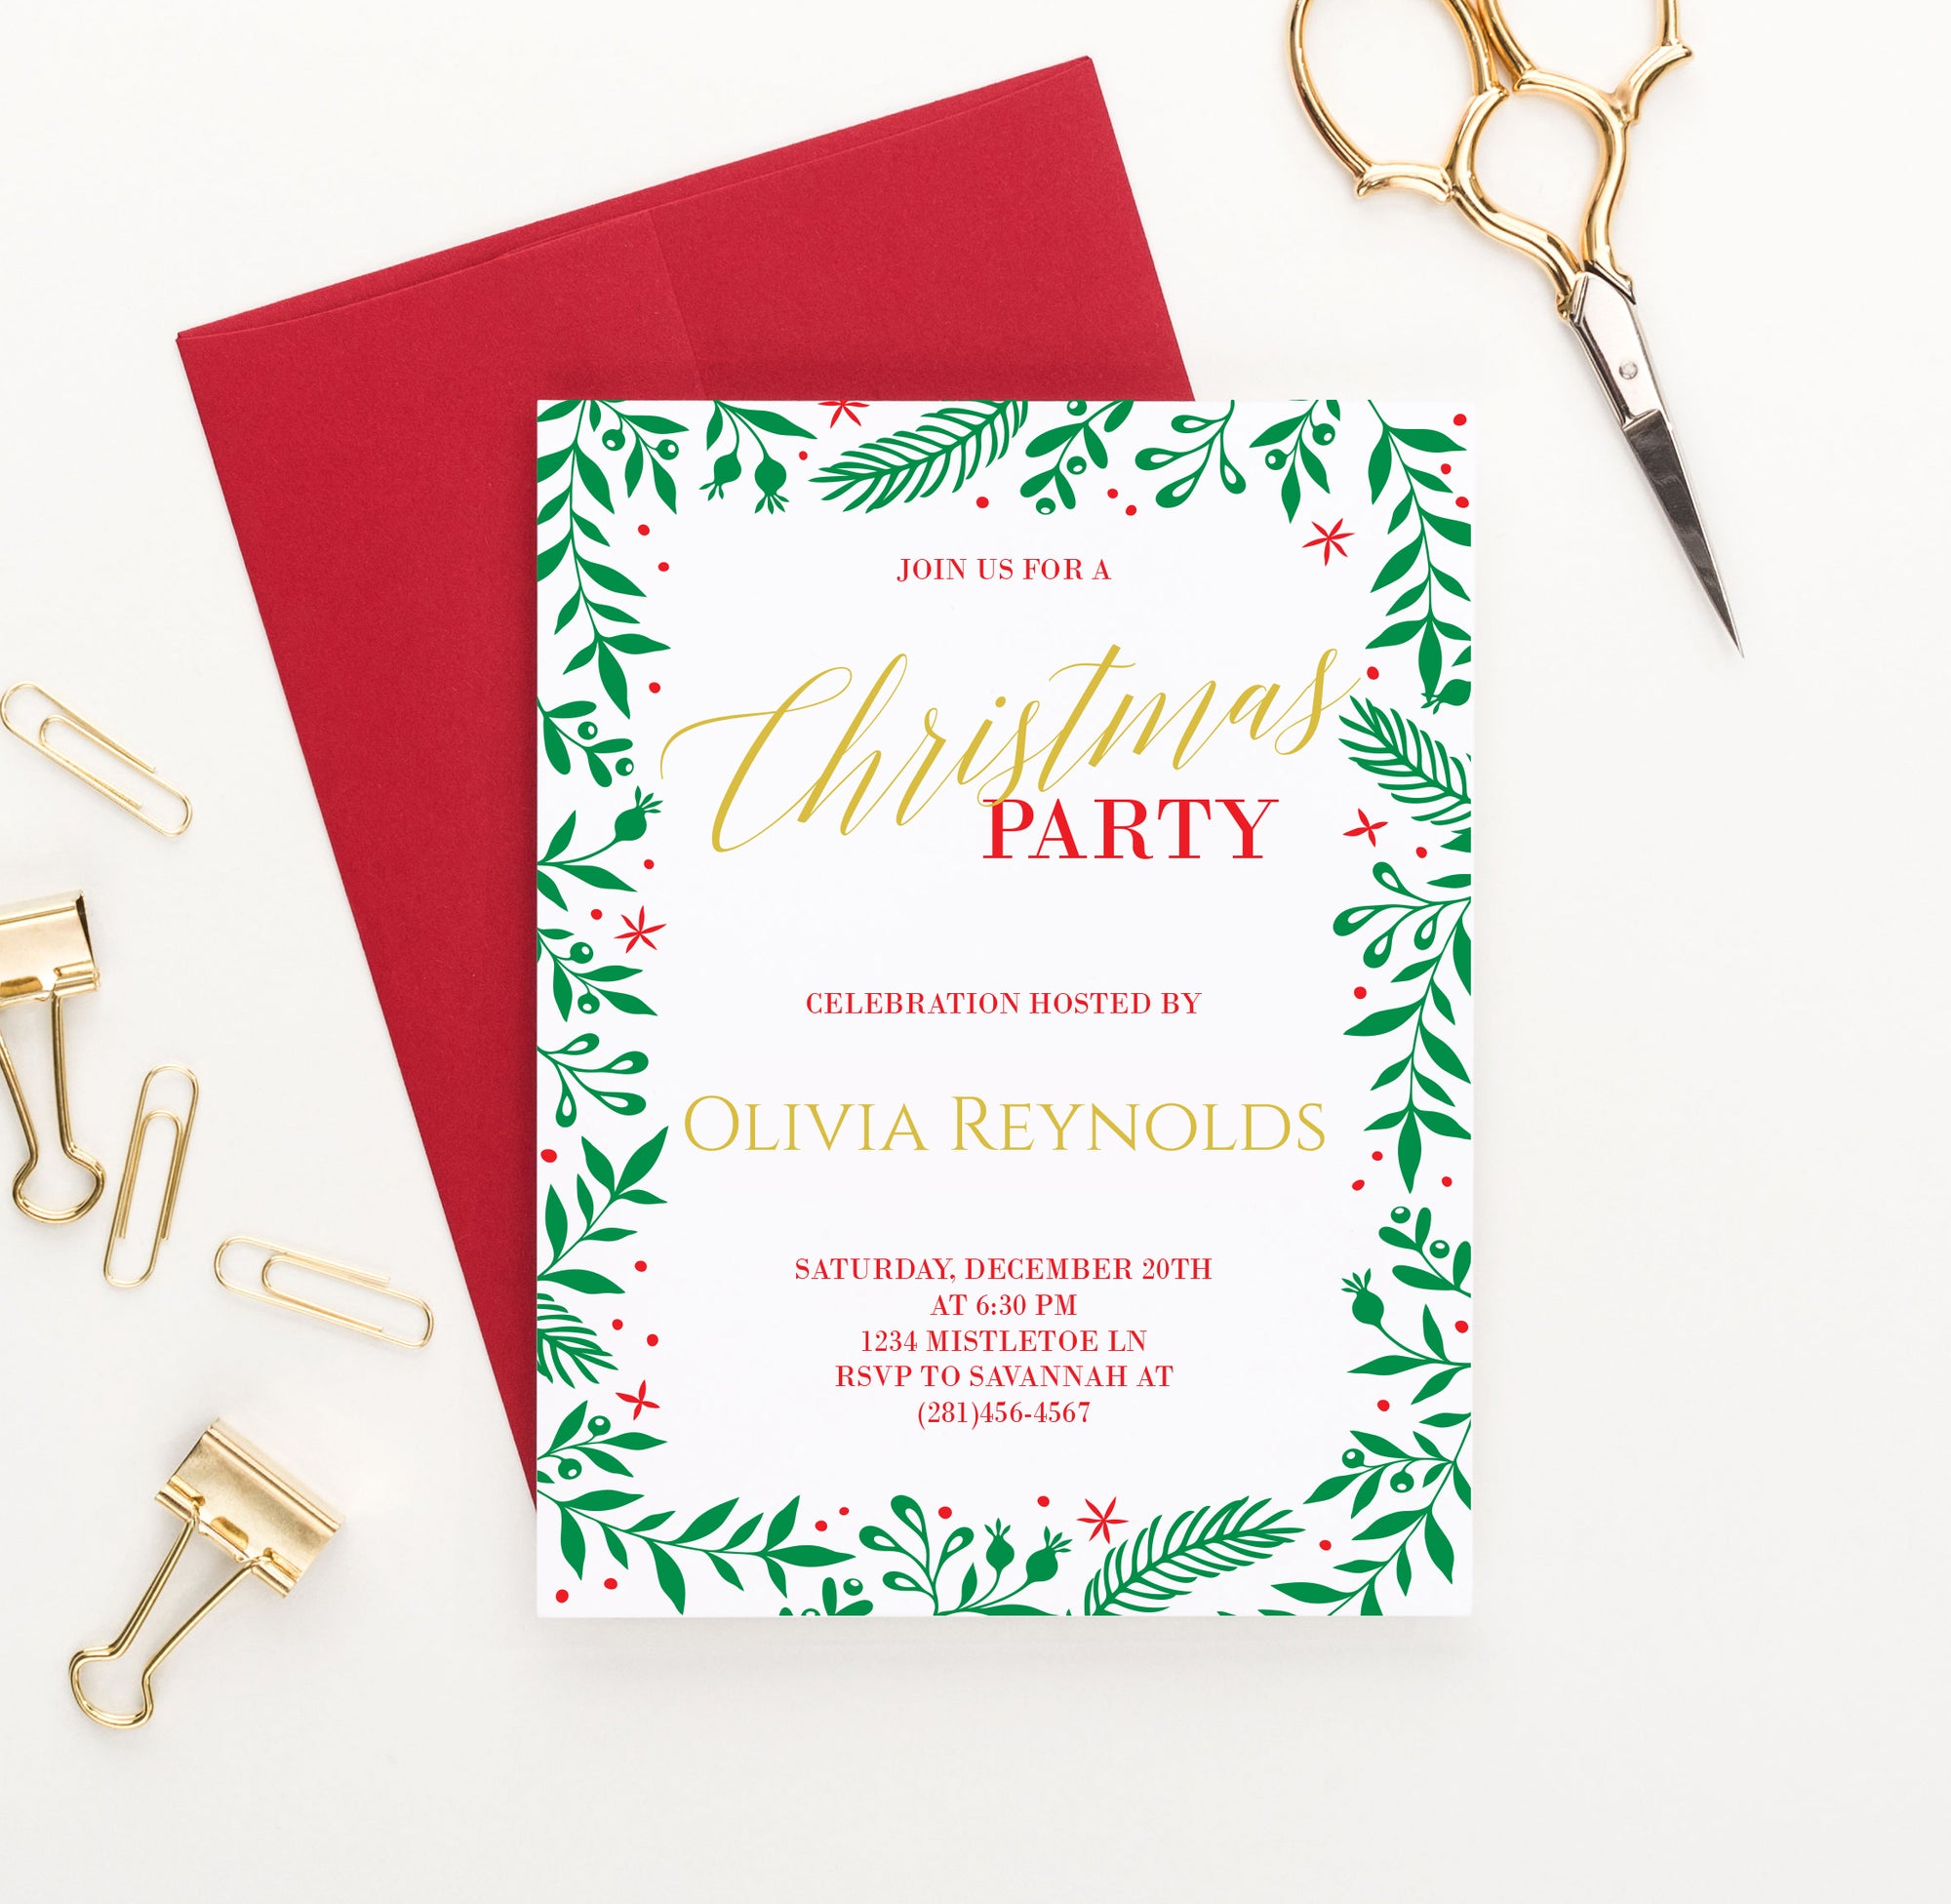 Candy Cane Striped Border Christmas Party Invites with Santa Hat